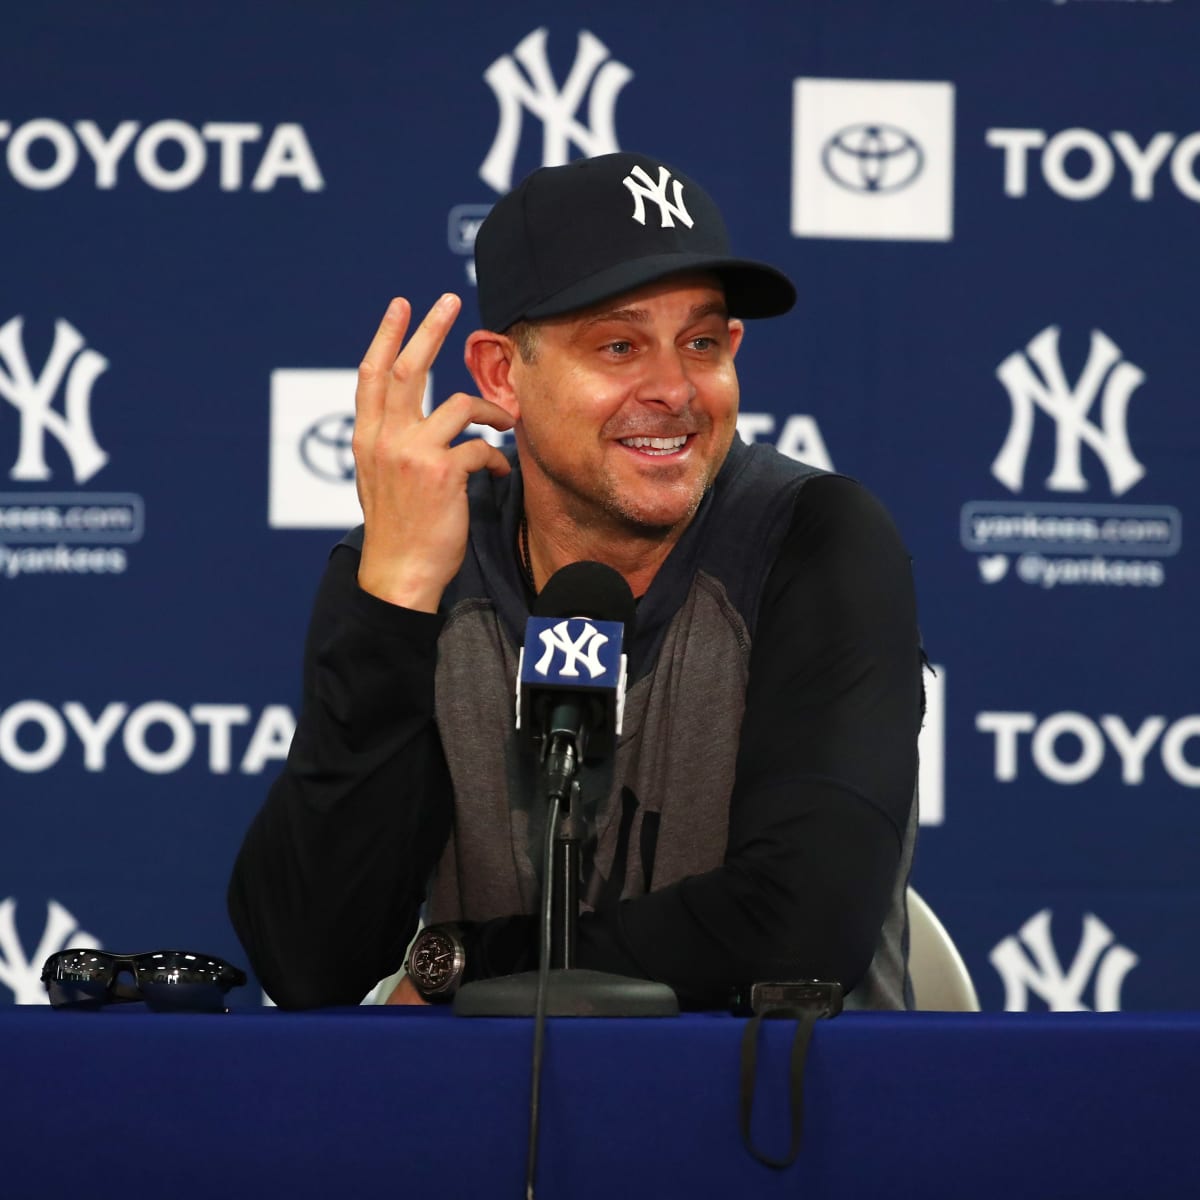 Yankees Re-Sign Manager Aaron Boone To 3-Year Contract - CBS New York